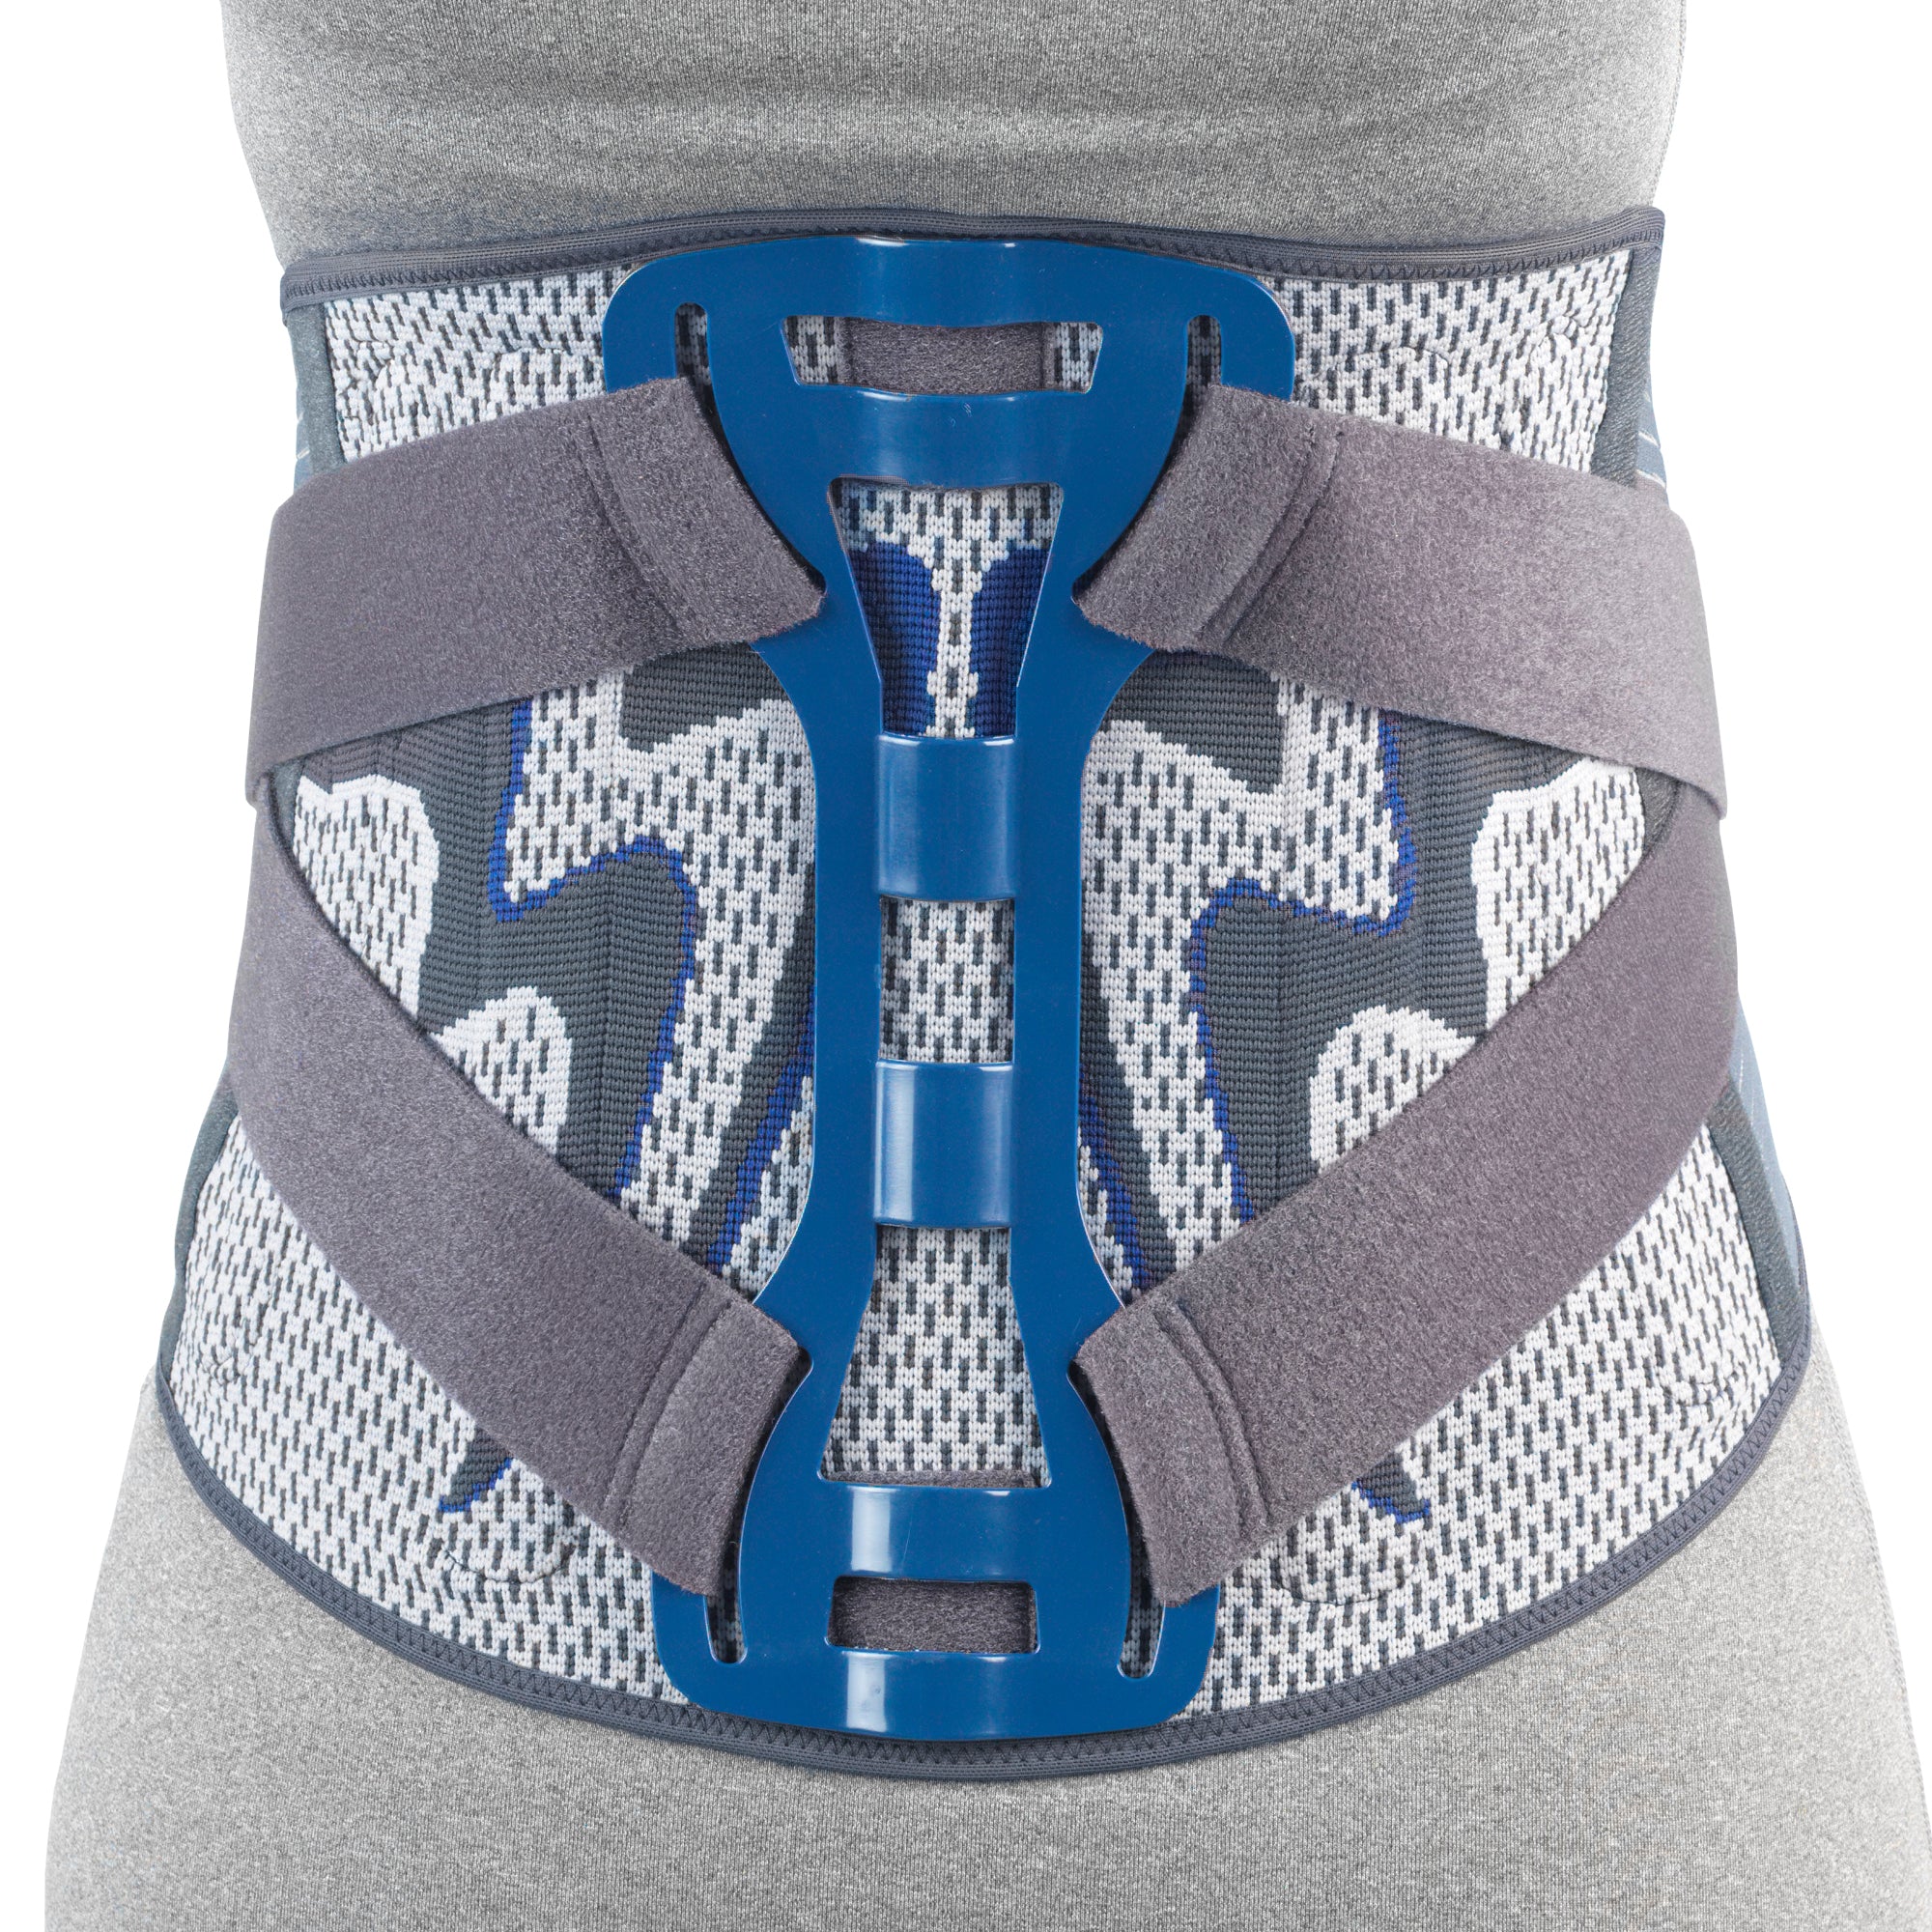 Lumbosacral Brace with Supporting Straps